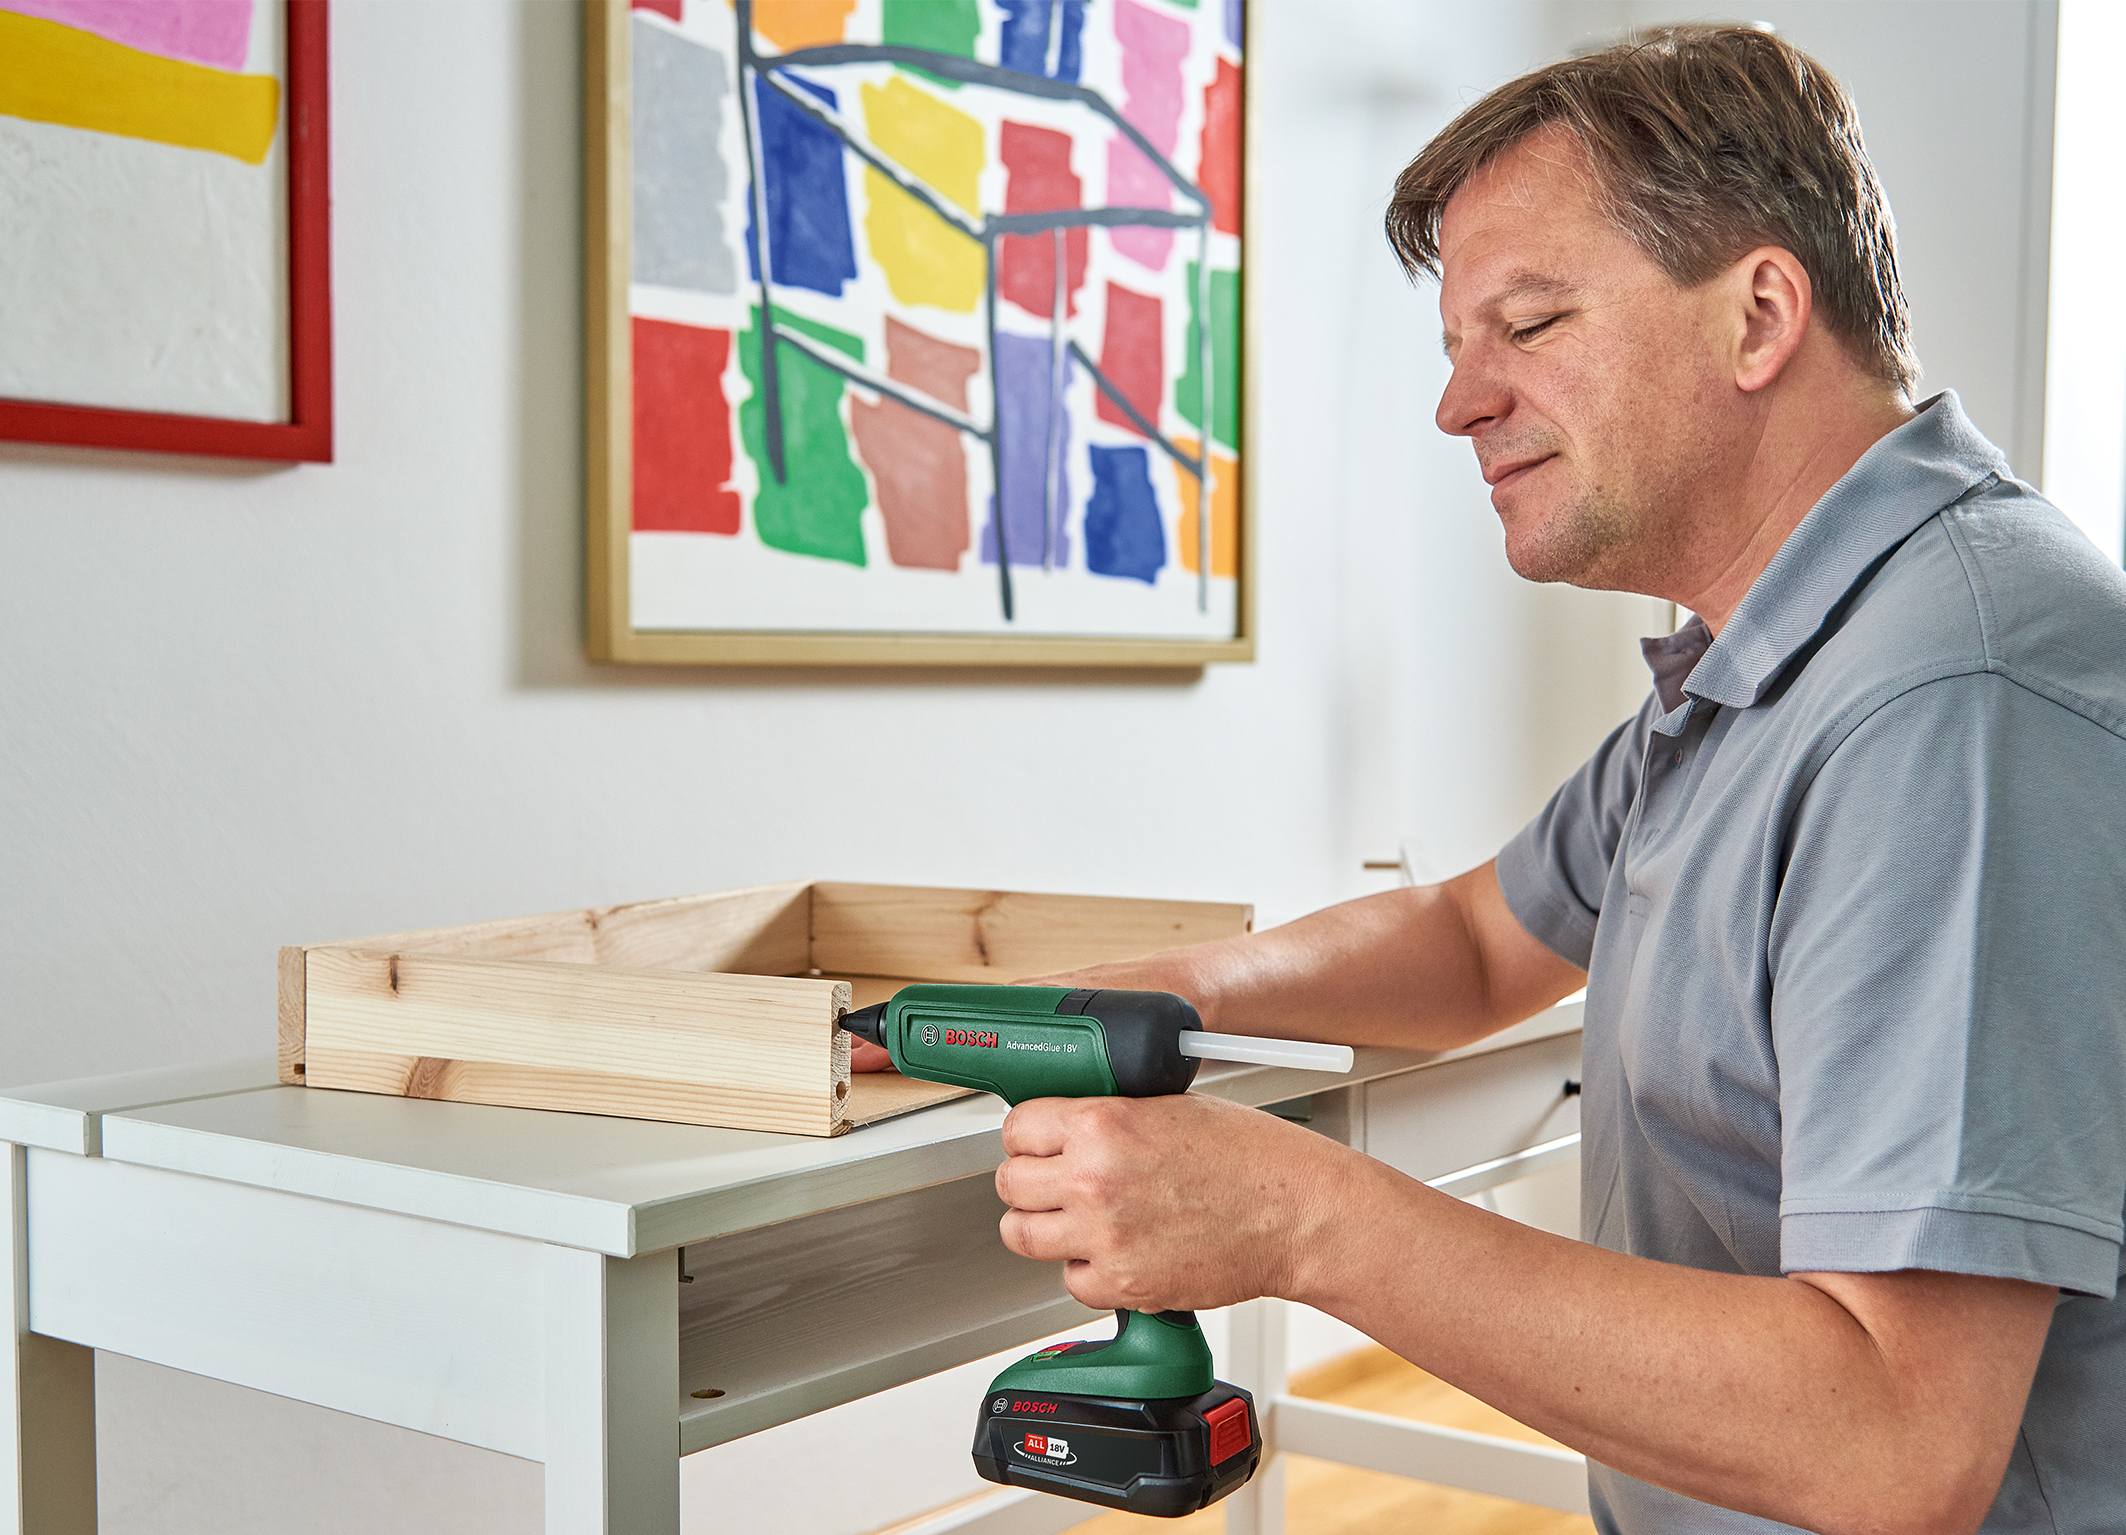 Two temperature levels for gluing appropriate to the particular material: Cordless glue gun AdvancedGlue 18V from Bosch